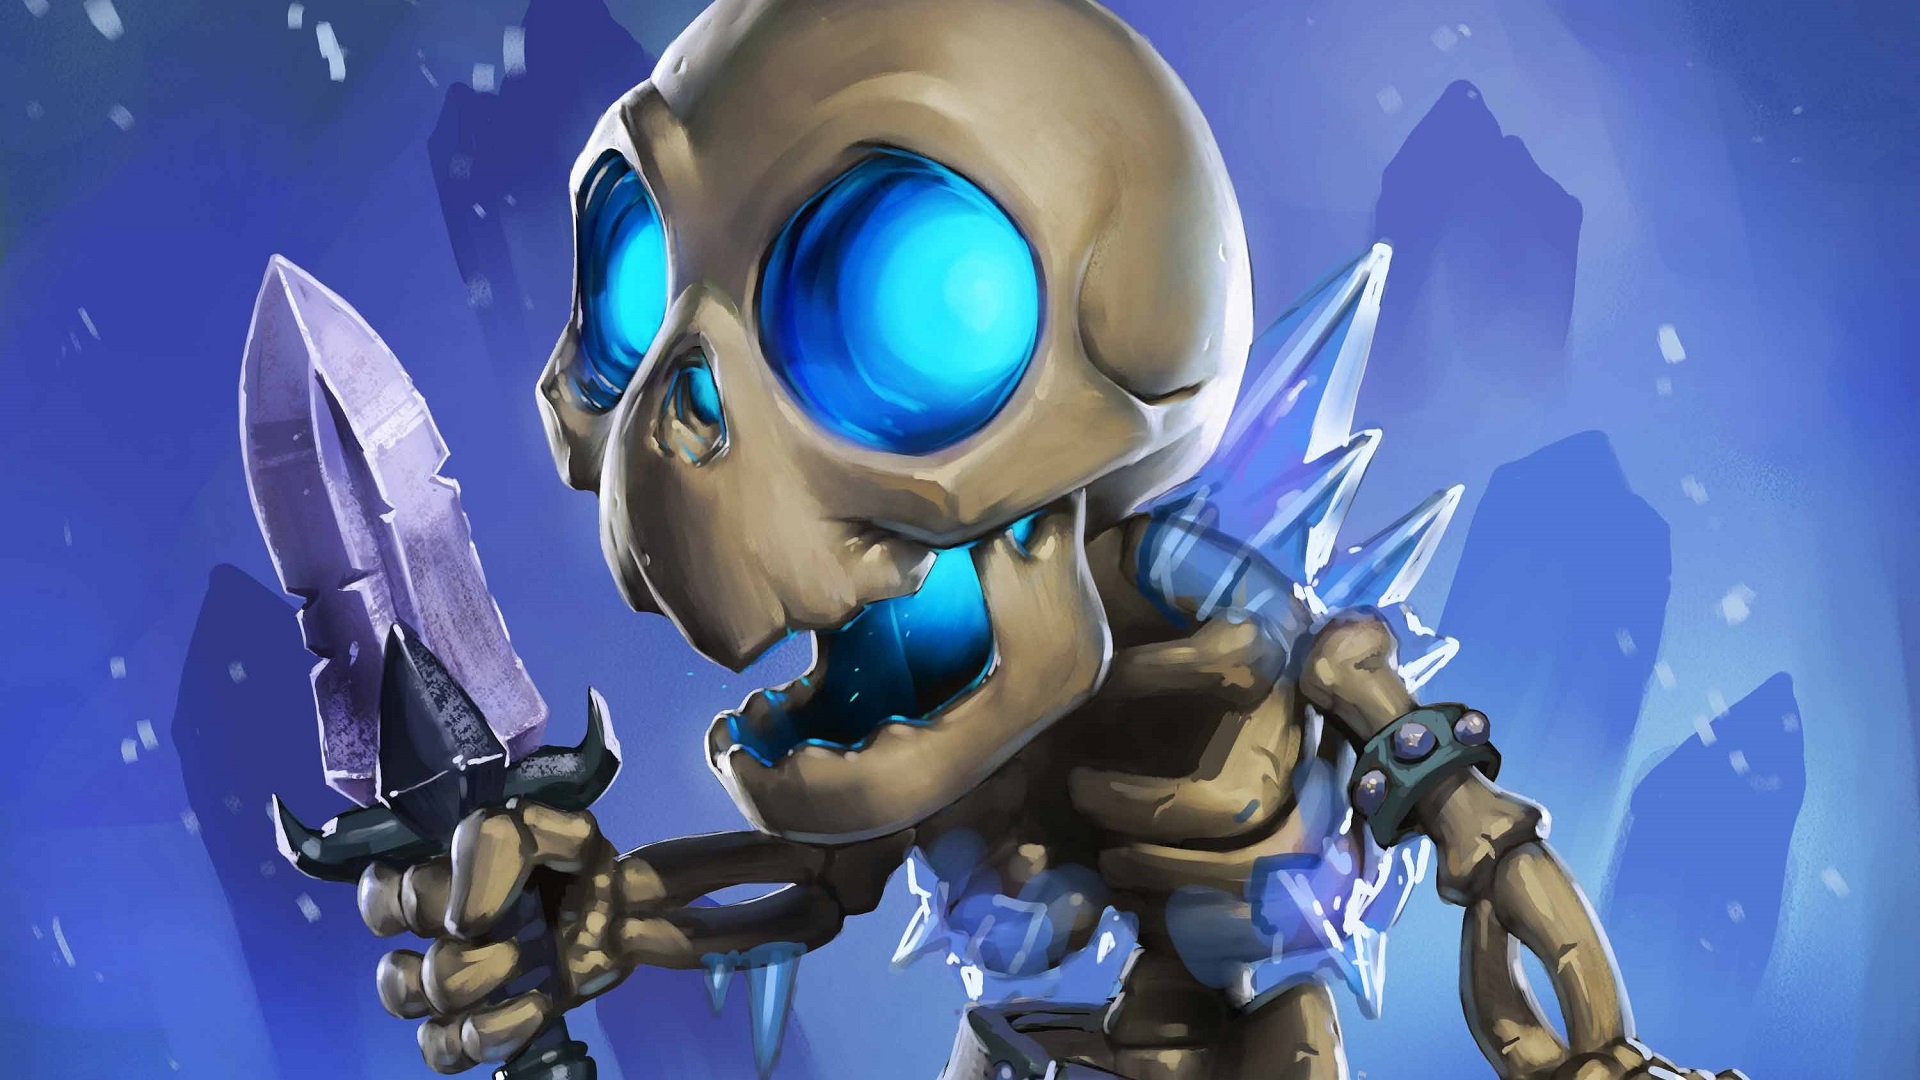 General 1920x1080 Hearthstone: Heroes of Warcraft Hearthstone Warcraft cards artwork Knights of the frozen throne skeleton video games blue violet